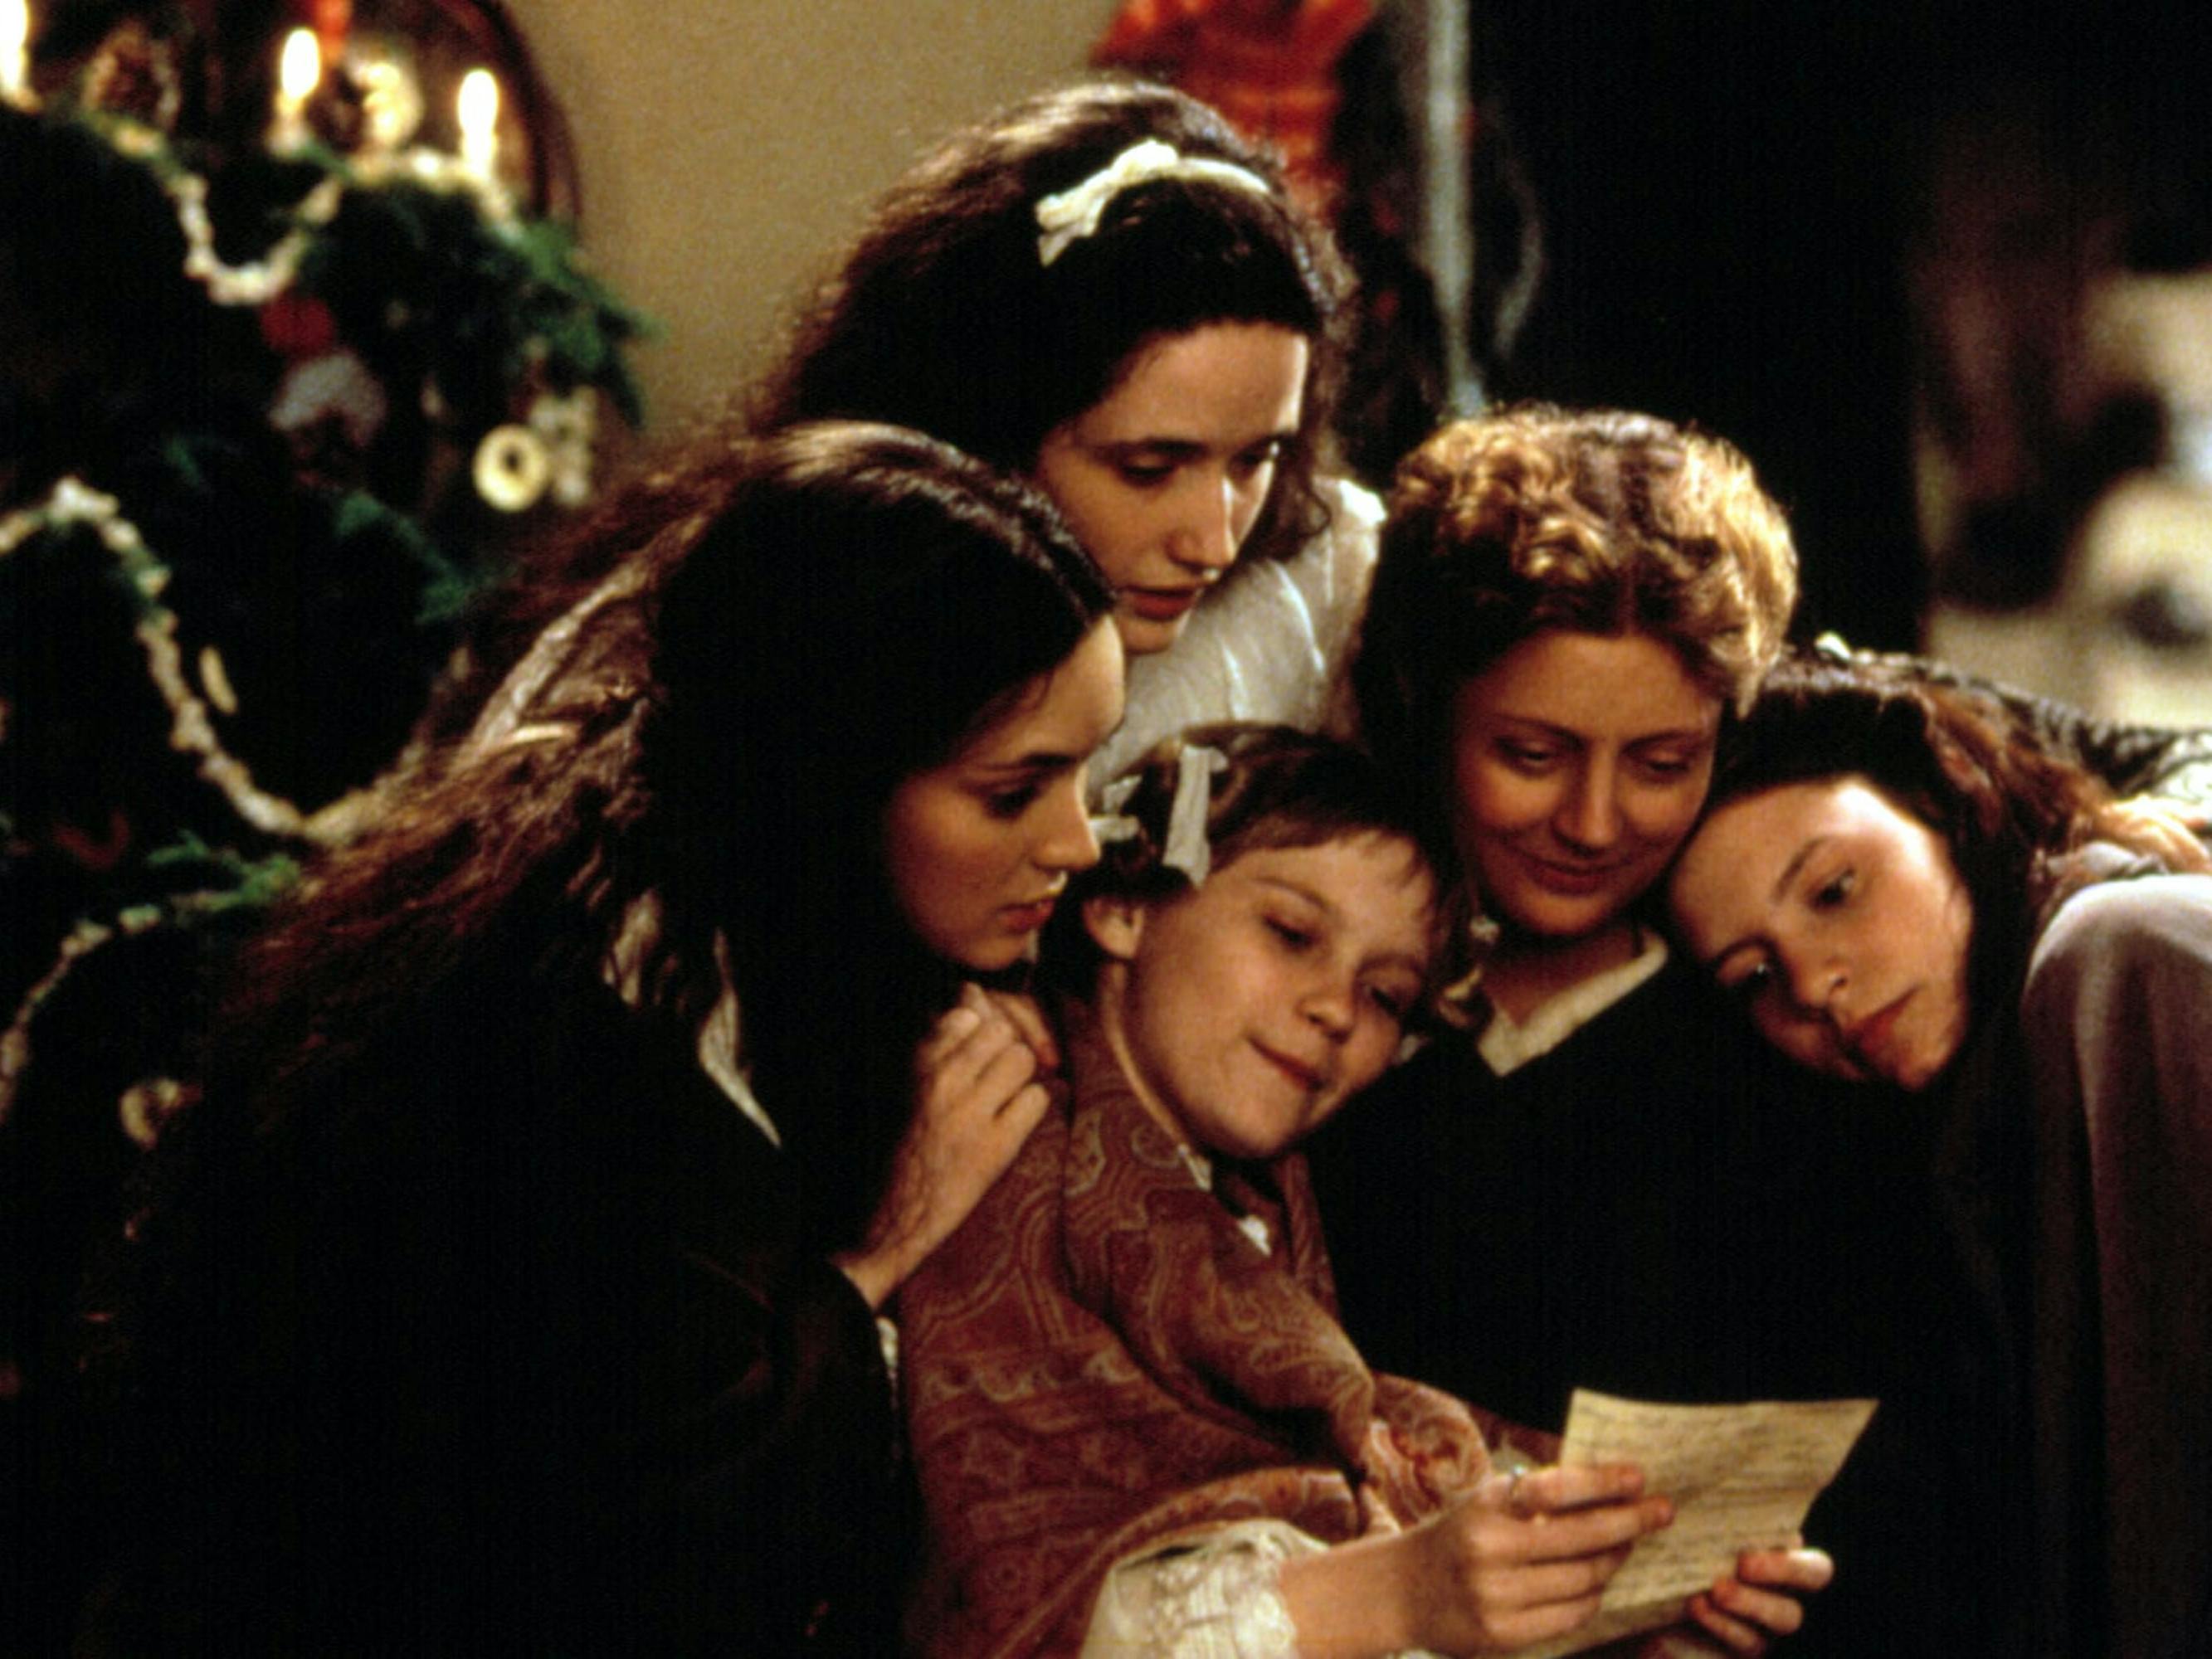 Jo March (Winona Ryder), Meg March (Trini Alvarado), Amy March (Kirsten Dunst), Mrs. March (Susan Sarandon), and Beth March (Claire Danes) sit huddle together reading a letter.